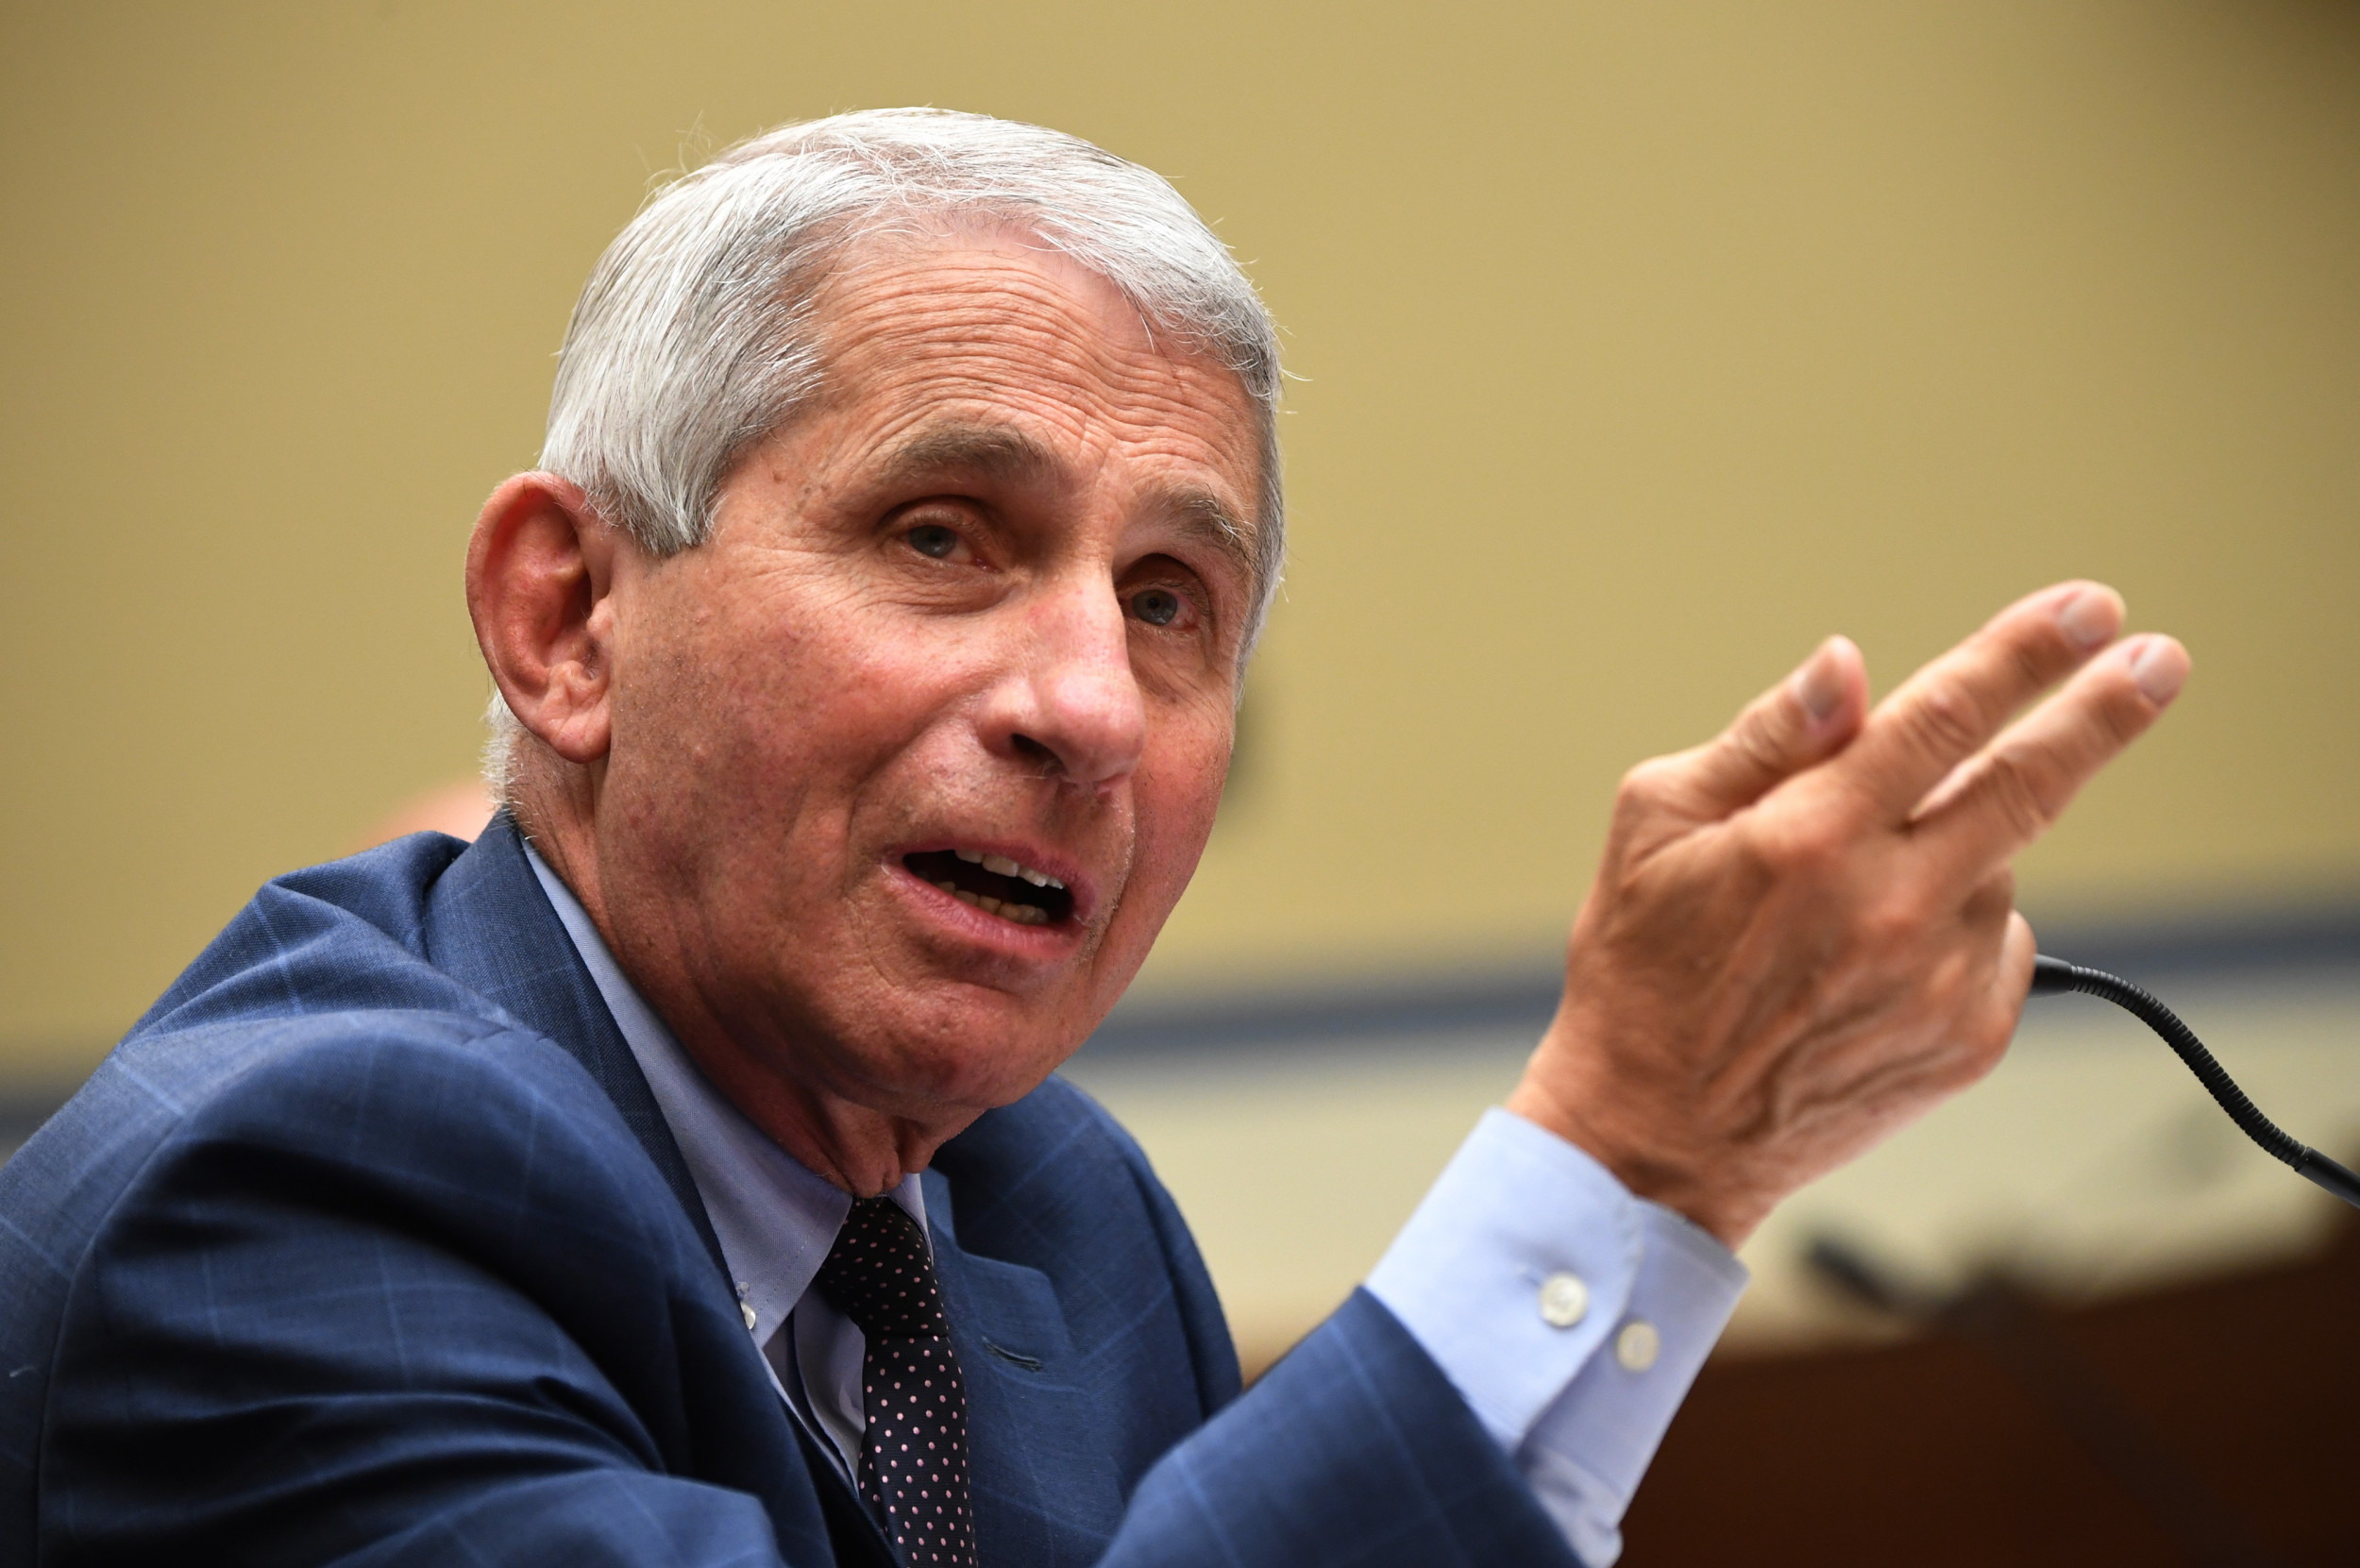 Dr. Fauci on Mandatory COVID Vaccines: 'Everything Will Be on the Table'